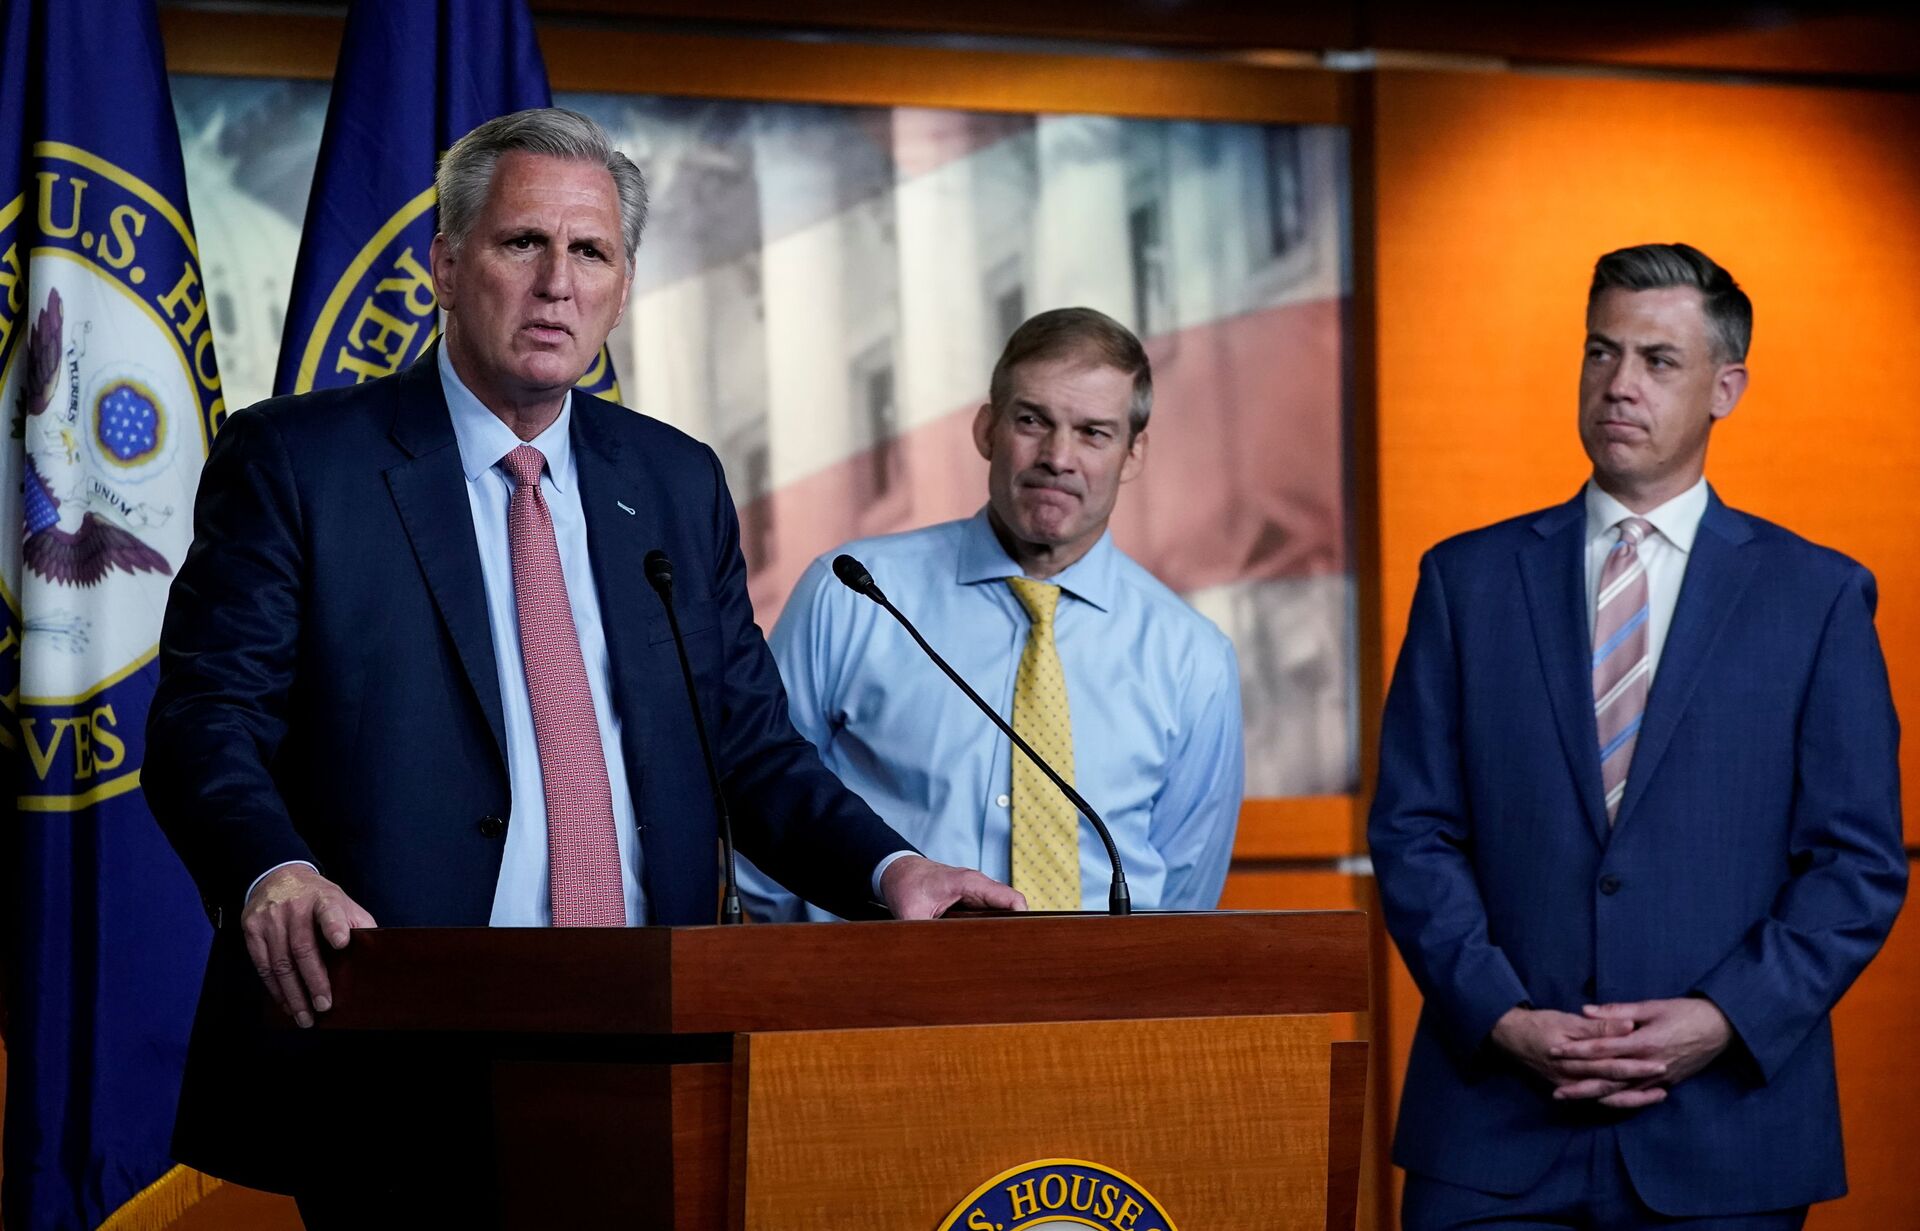 U.S. House Minority Leader Kevin McCarthy (R-CA) announces the withdrawal of his nominees to serve on the special committee probing the Jan. 6 attack on the Capitol, as two of the Republican nominees, Reps' Jim Jordan (R-OH) and Jim Banks (R-IN), standby during a news conference on Capitol Hill in Washington, U.S., July 21, 2021 - Sputnik International, 1920, 07.09.2021